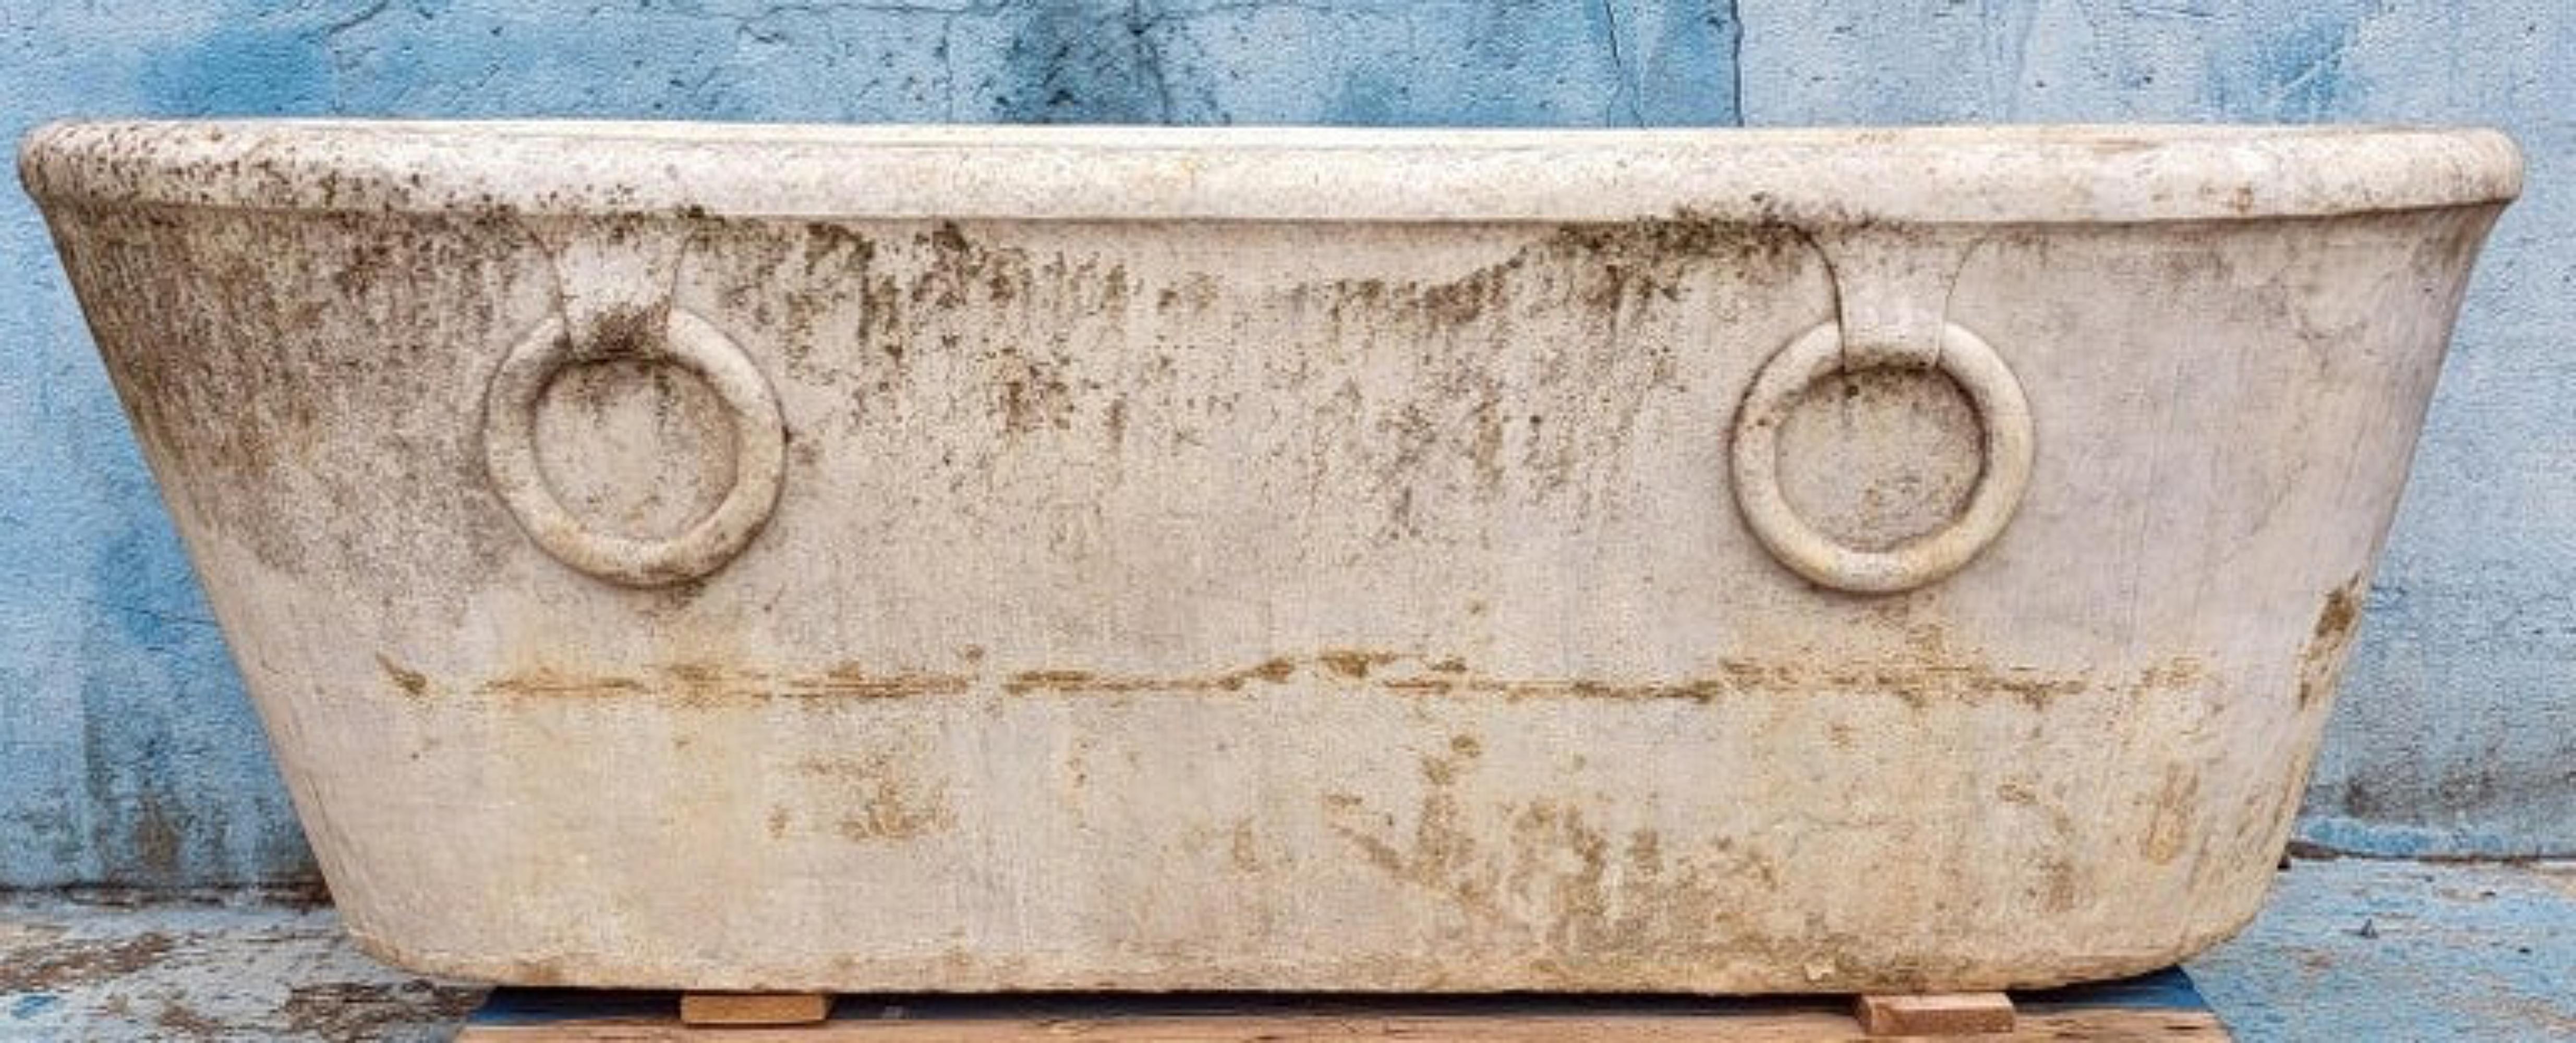 Antique bathtub in Carrara white marble with rings 18th century
Height 60 cm
Width 76 cm
Length 176 cm
Internal depth of the basin 50 cm
Weight 300 Kg
Manufacture 18th century
Material white Carrara marble
Internal Measures 160 X 71 cm.

Important